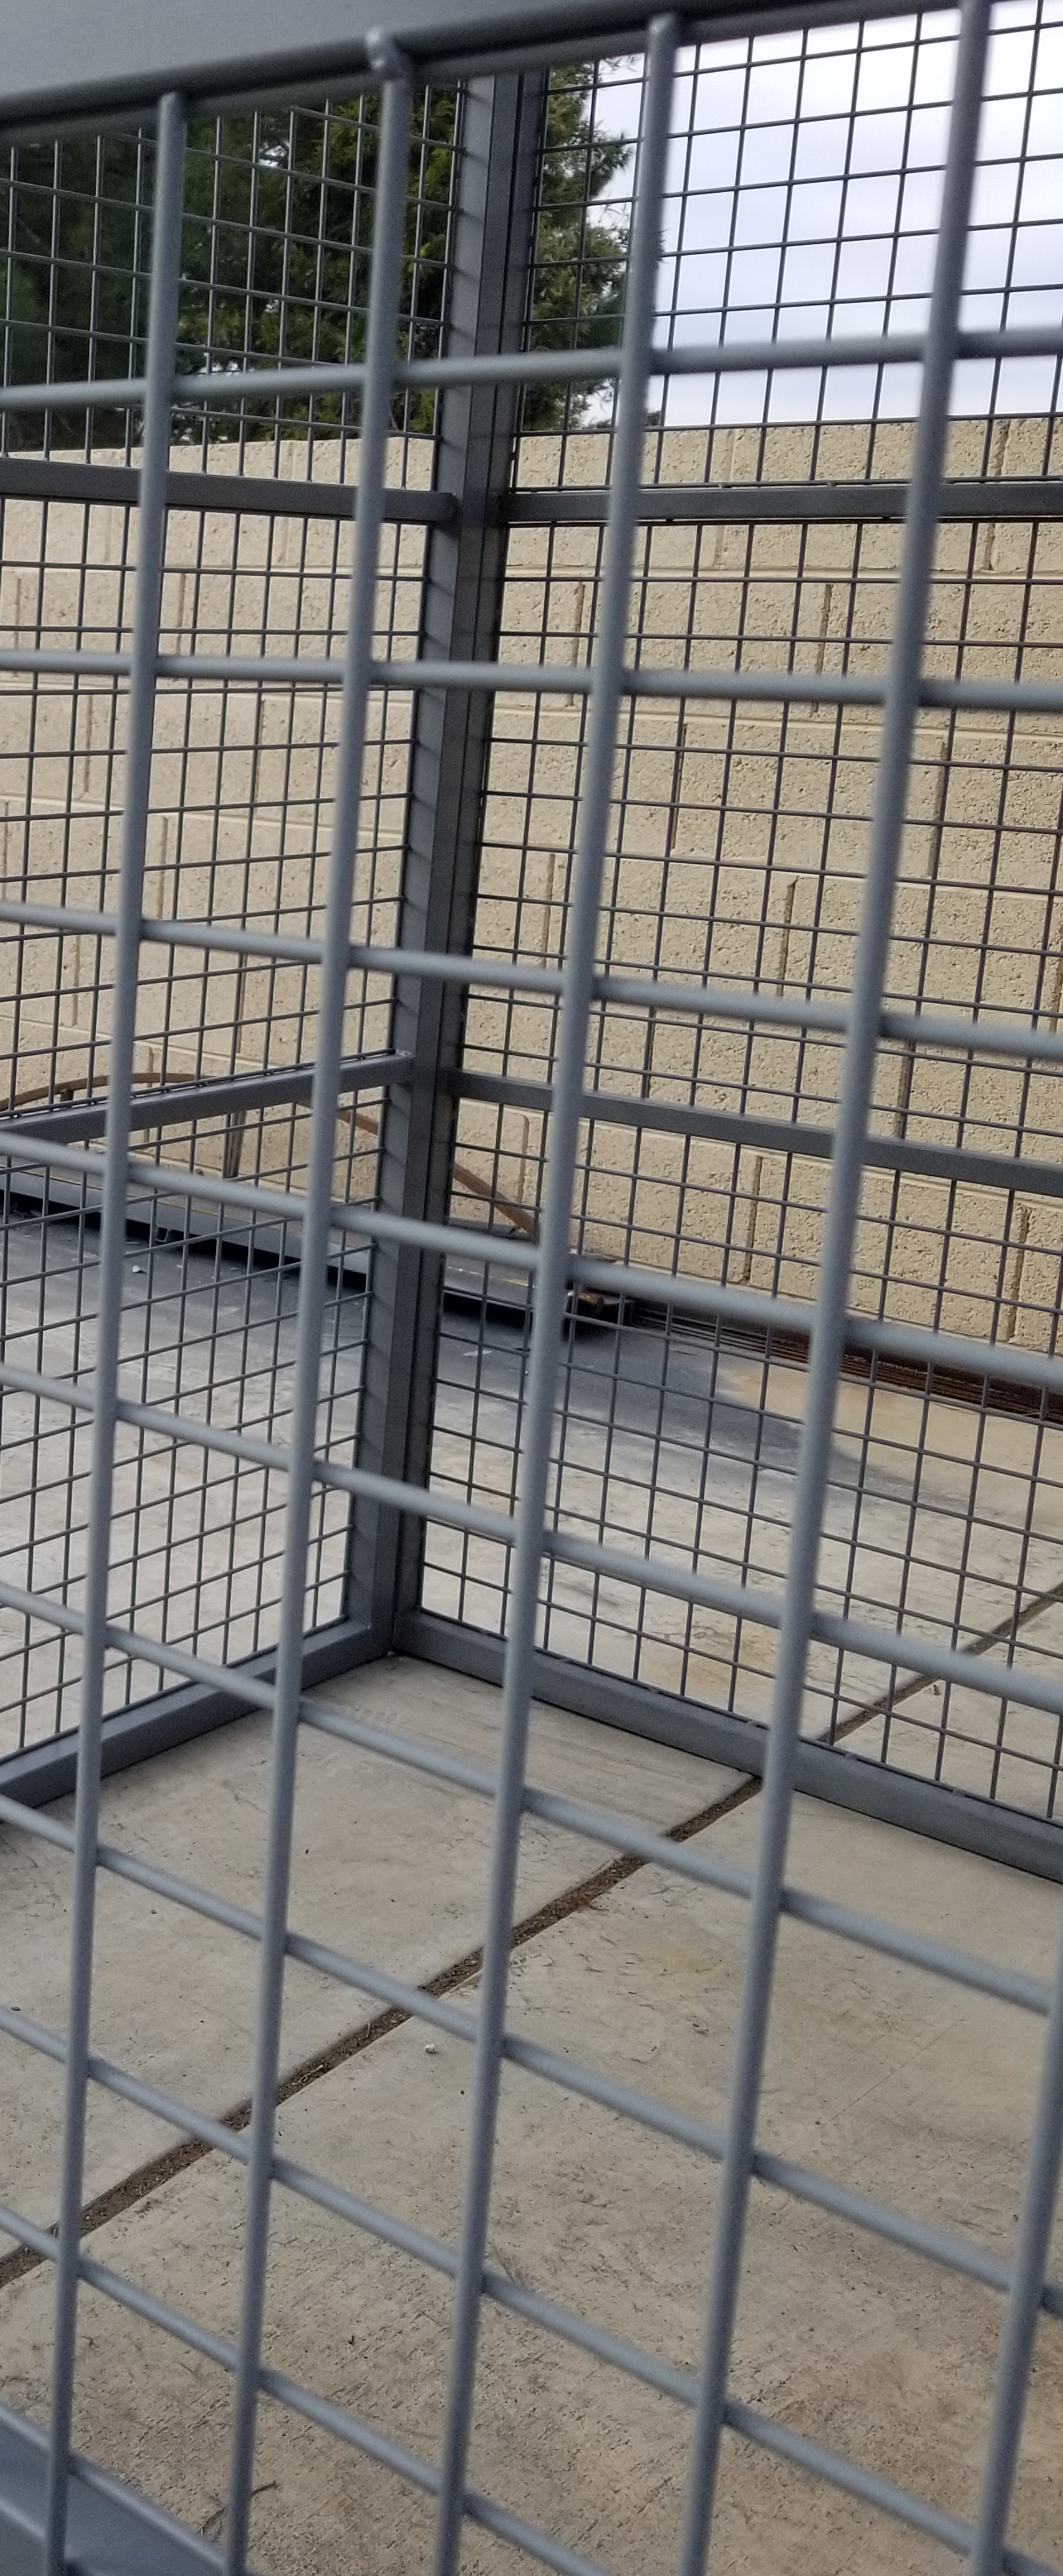 Wire-close-up-Xtreme-Dog-Crates-Kennels-from-carrymydog.com